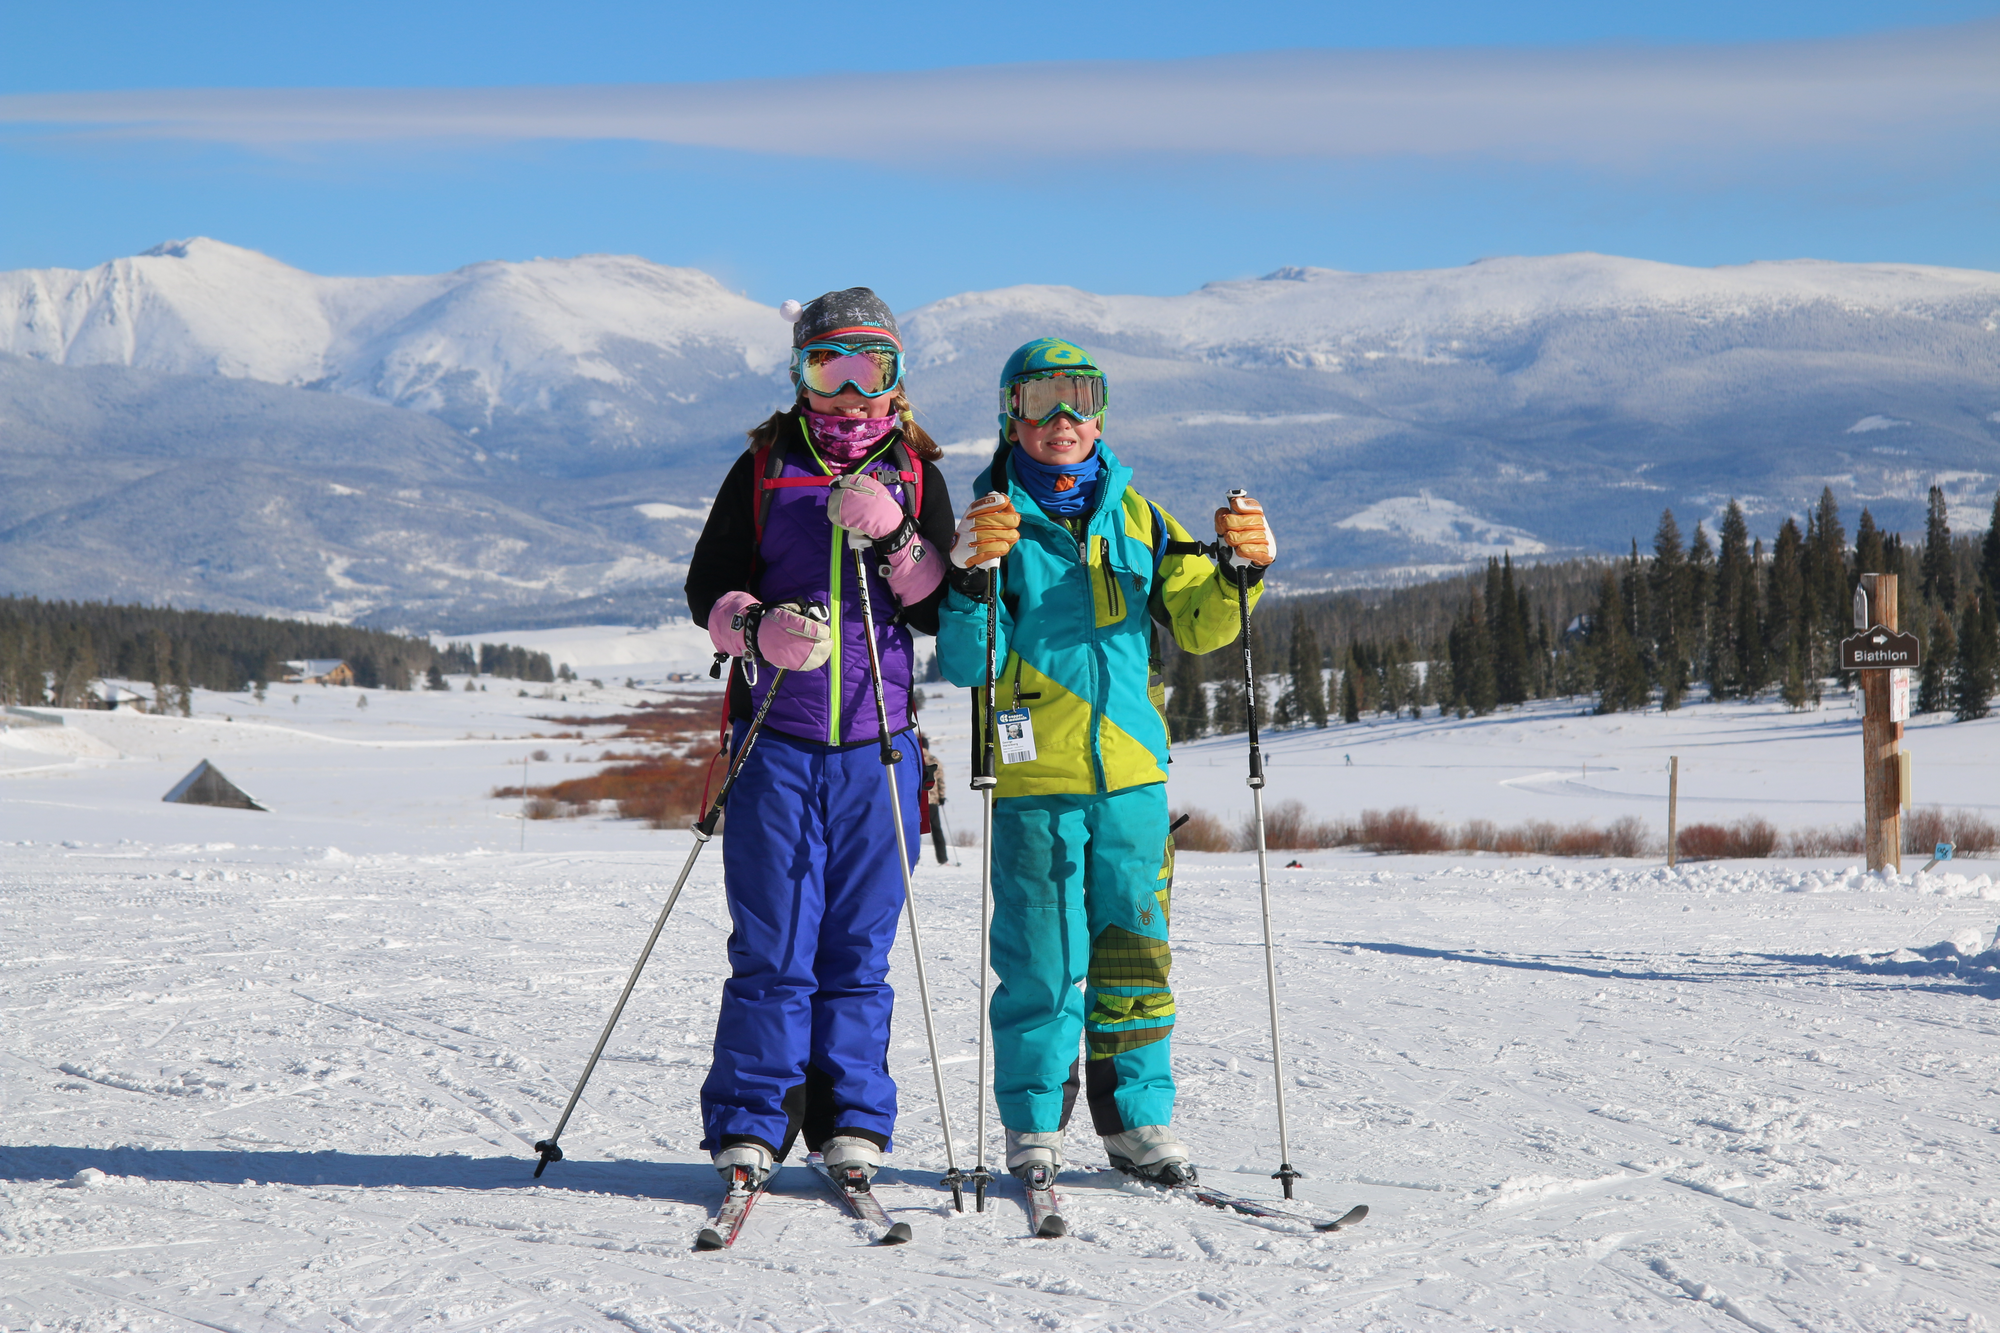 two people posing for a photo in ski gear